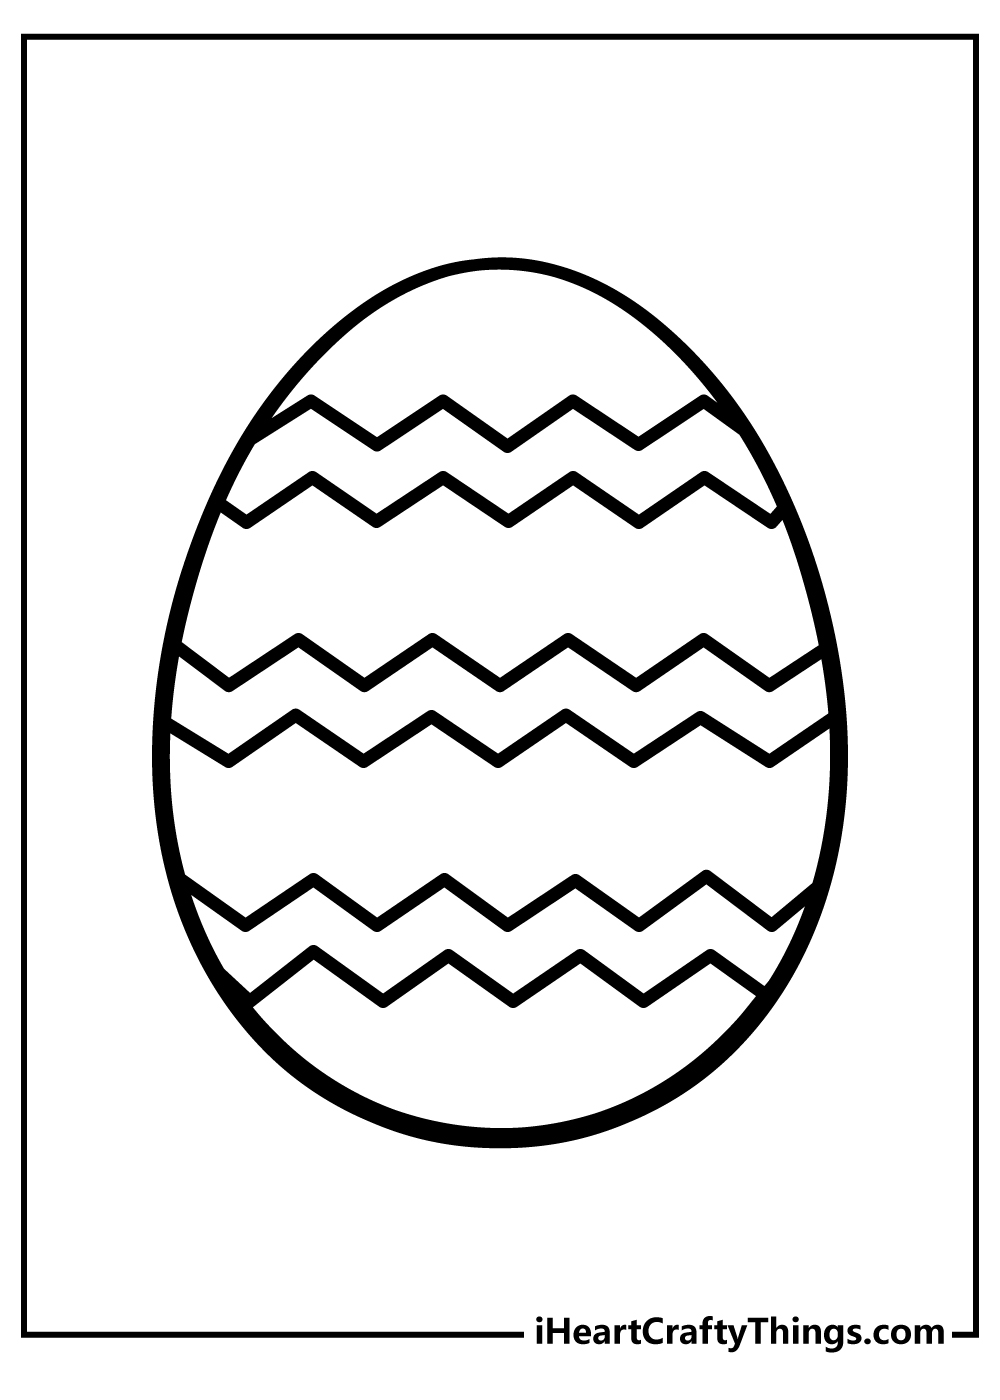 Easter egg coloring pages free printable